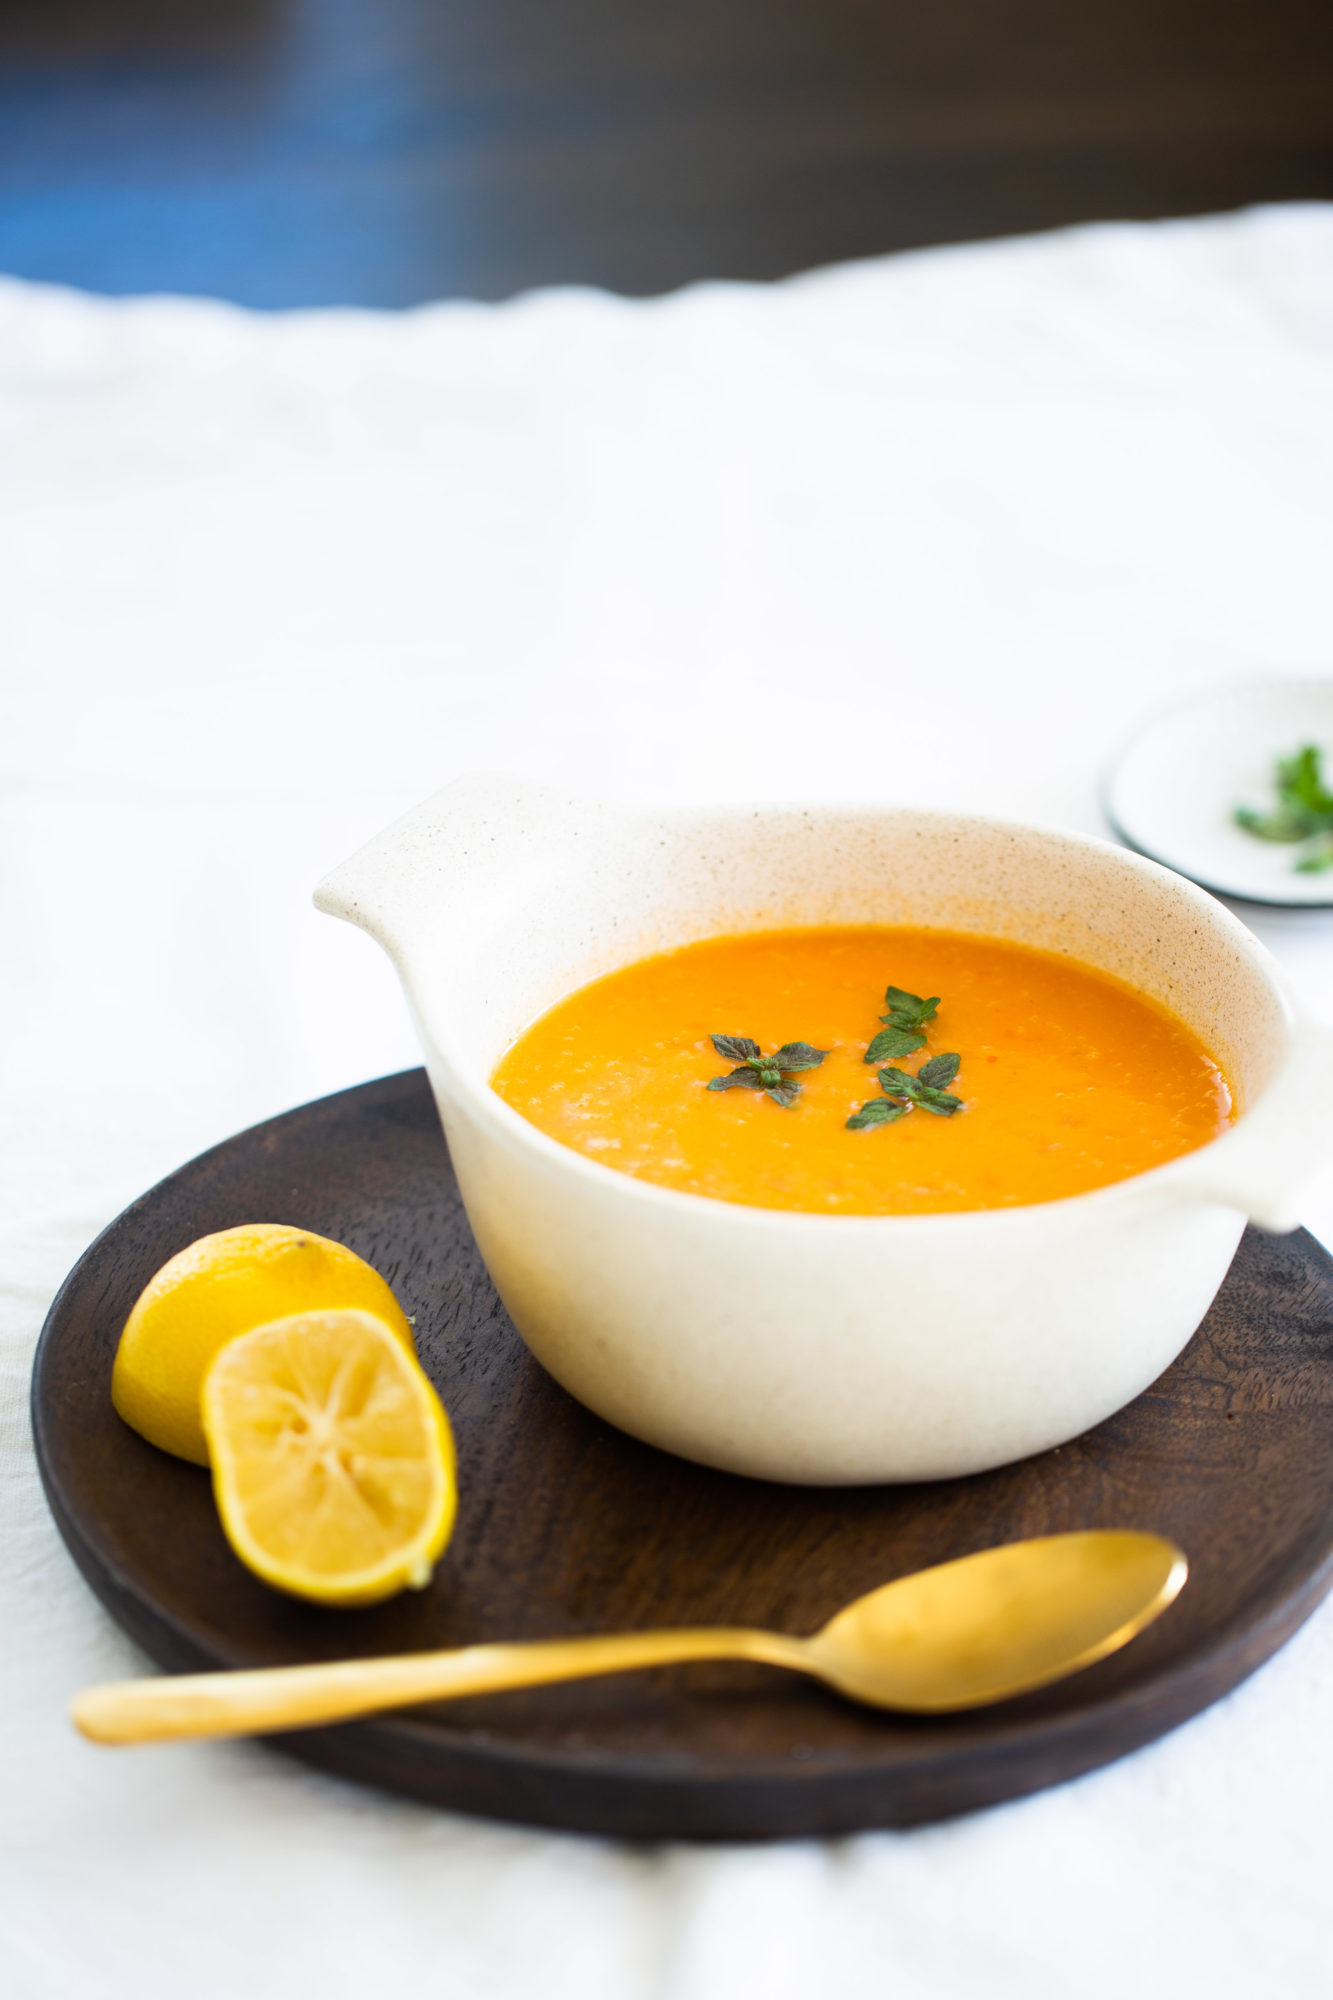 ROASTED RED BELL PEPPER AND POTATO SOUP WITH SPICES